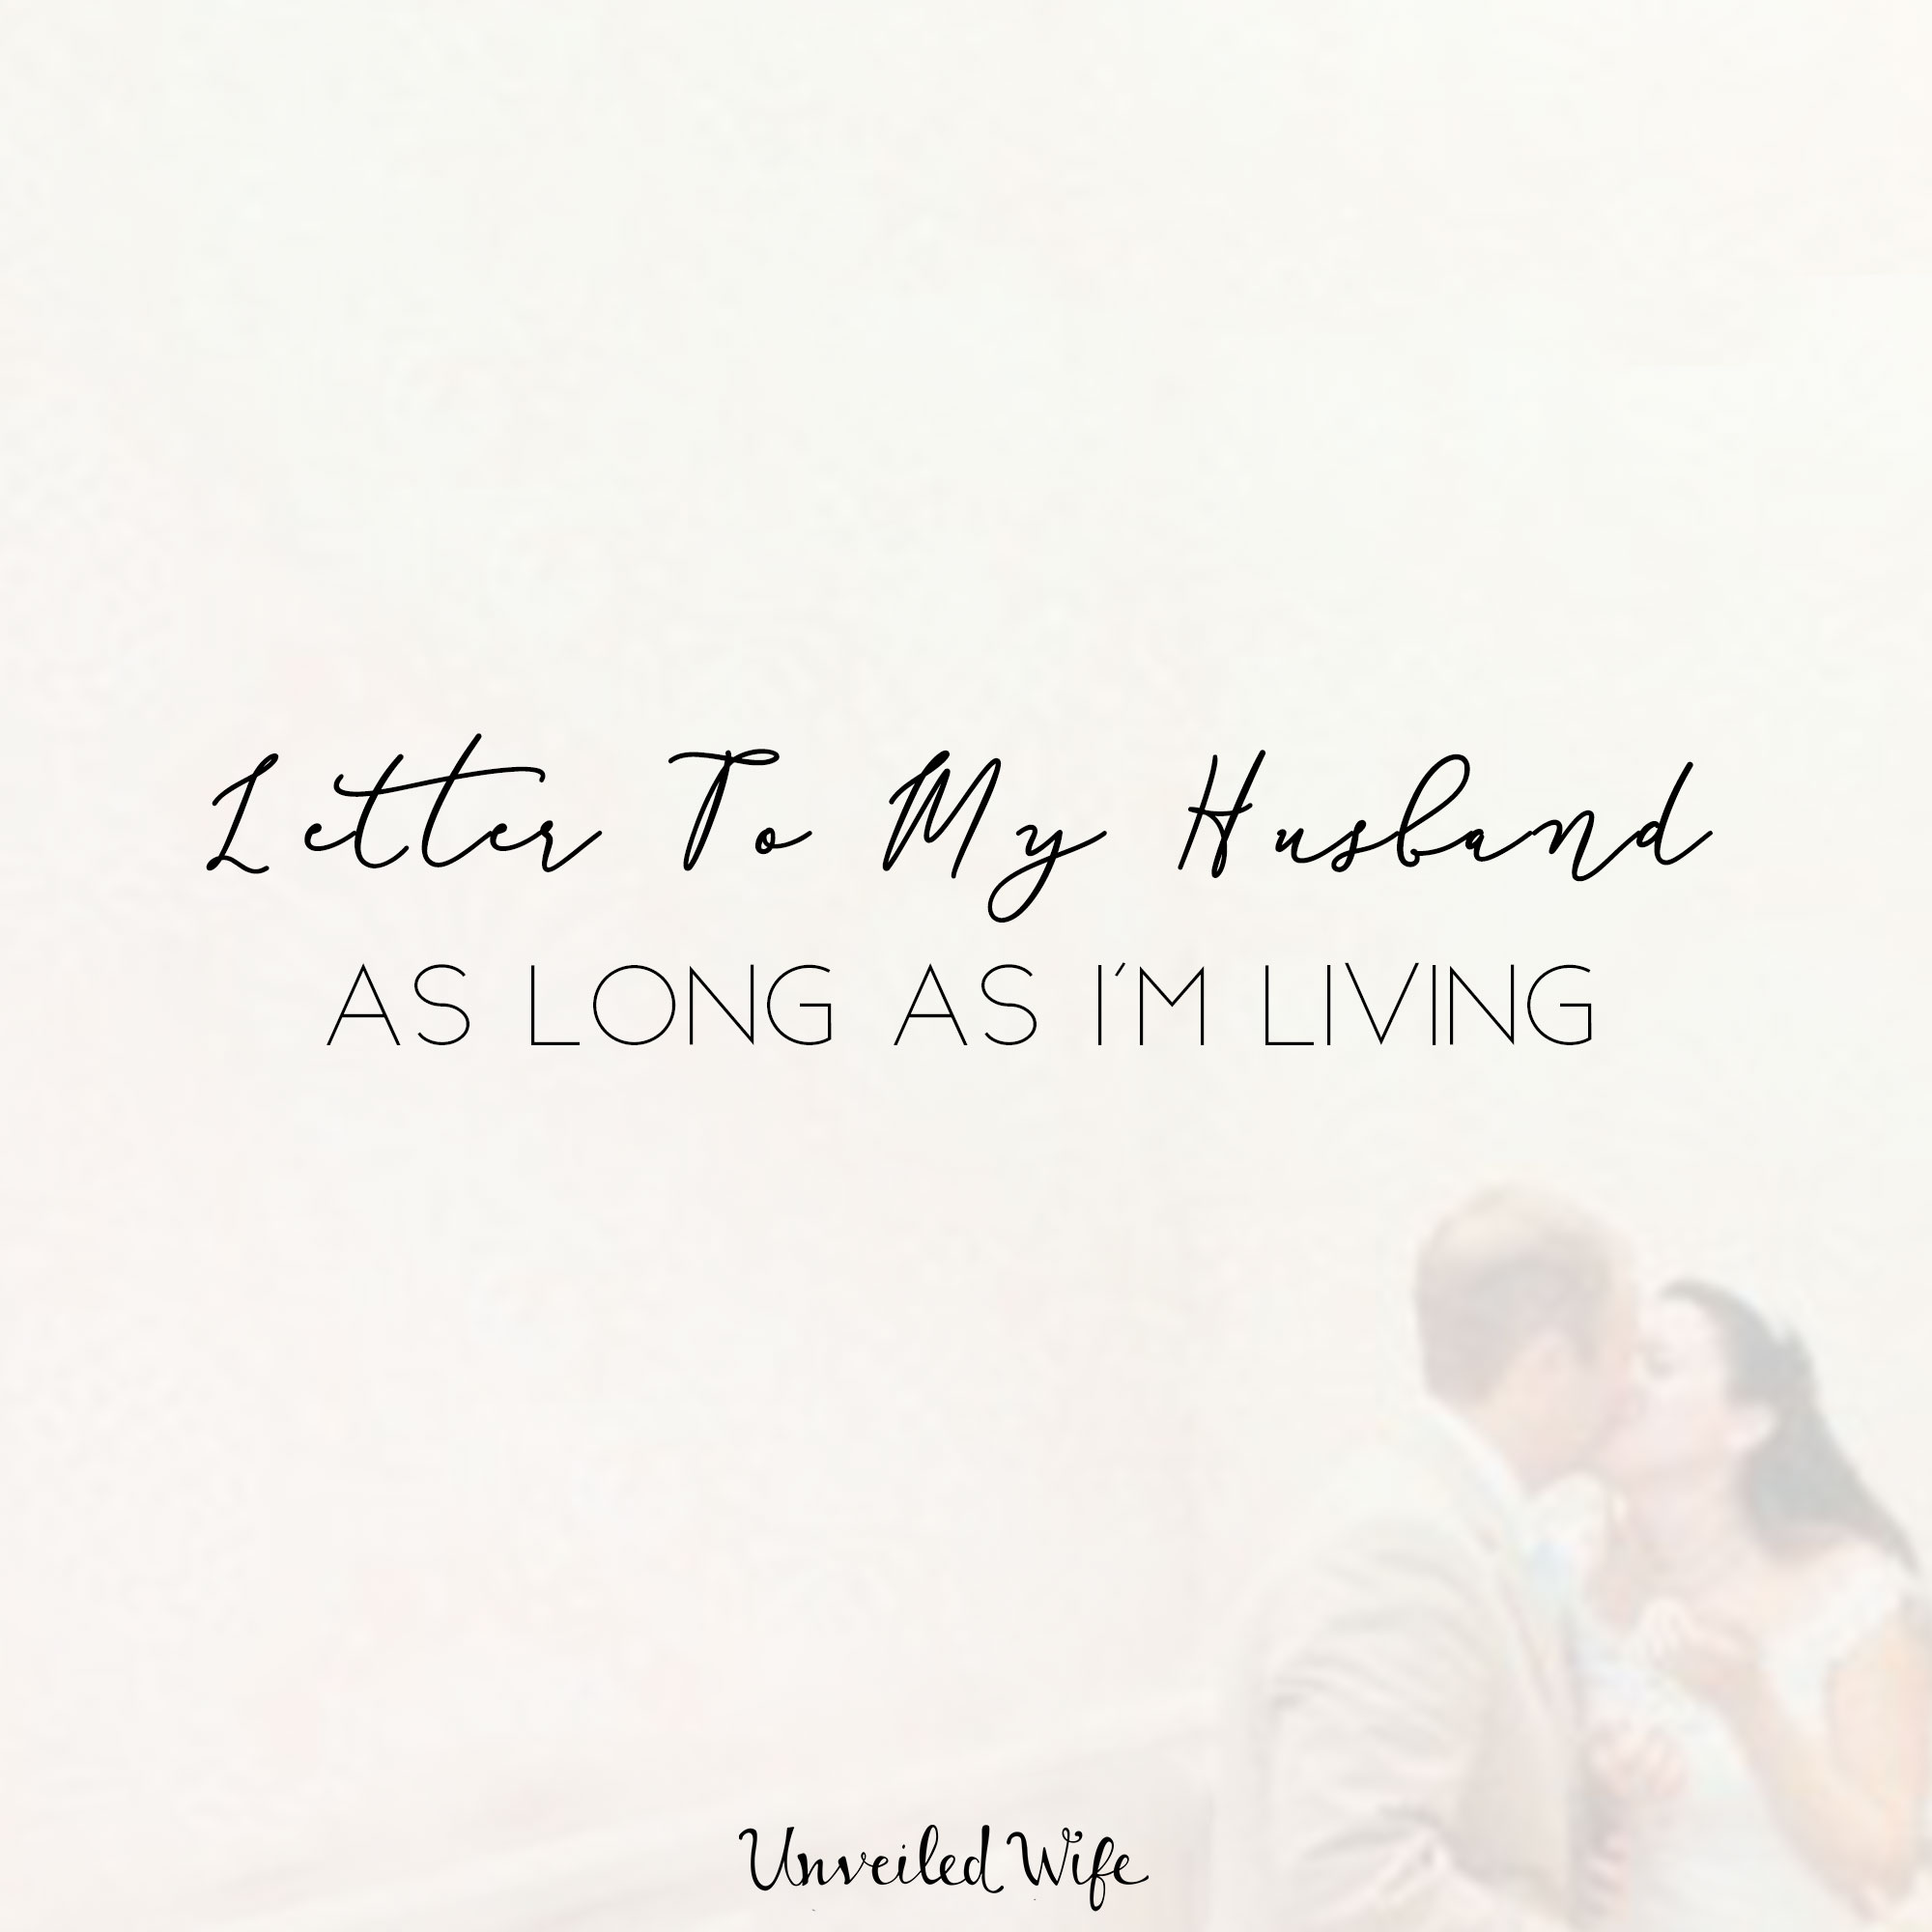 Letter To My Husband: As Long As I’m Living